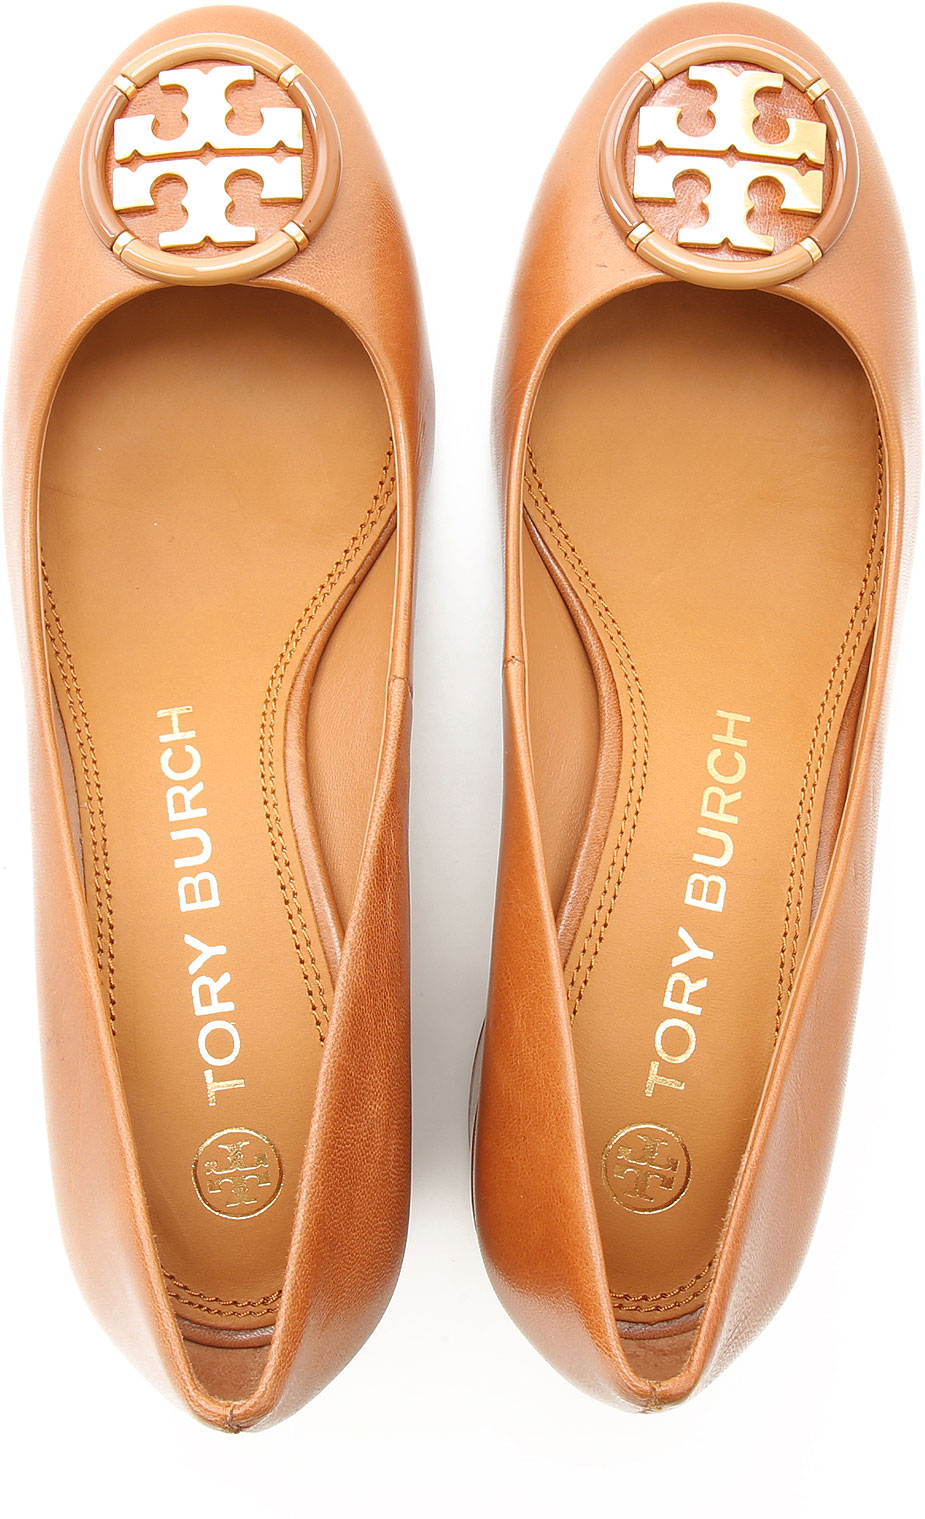 Womens Shoes Tory Burch Style Code 76483 240 7508